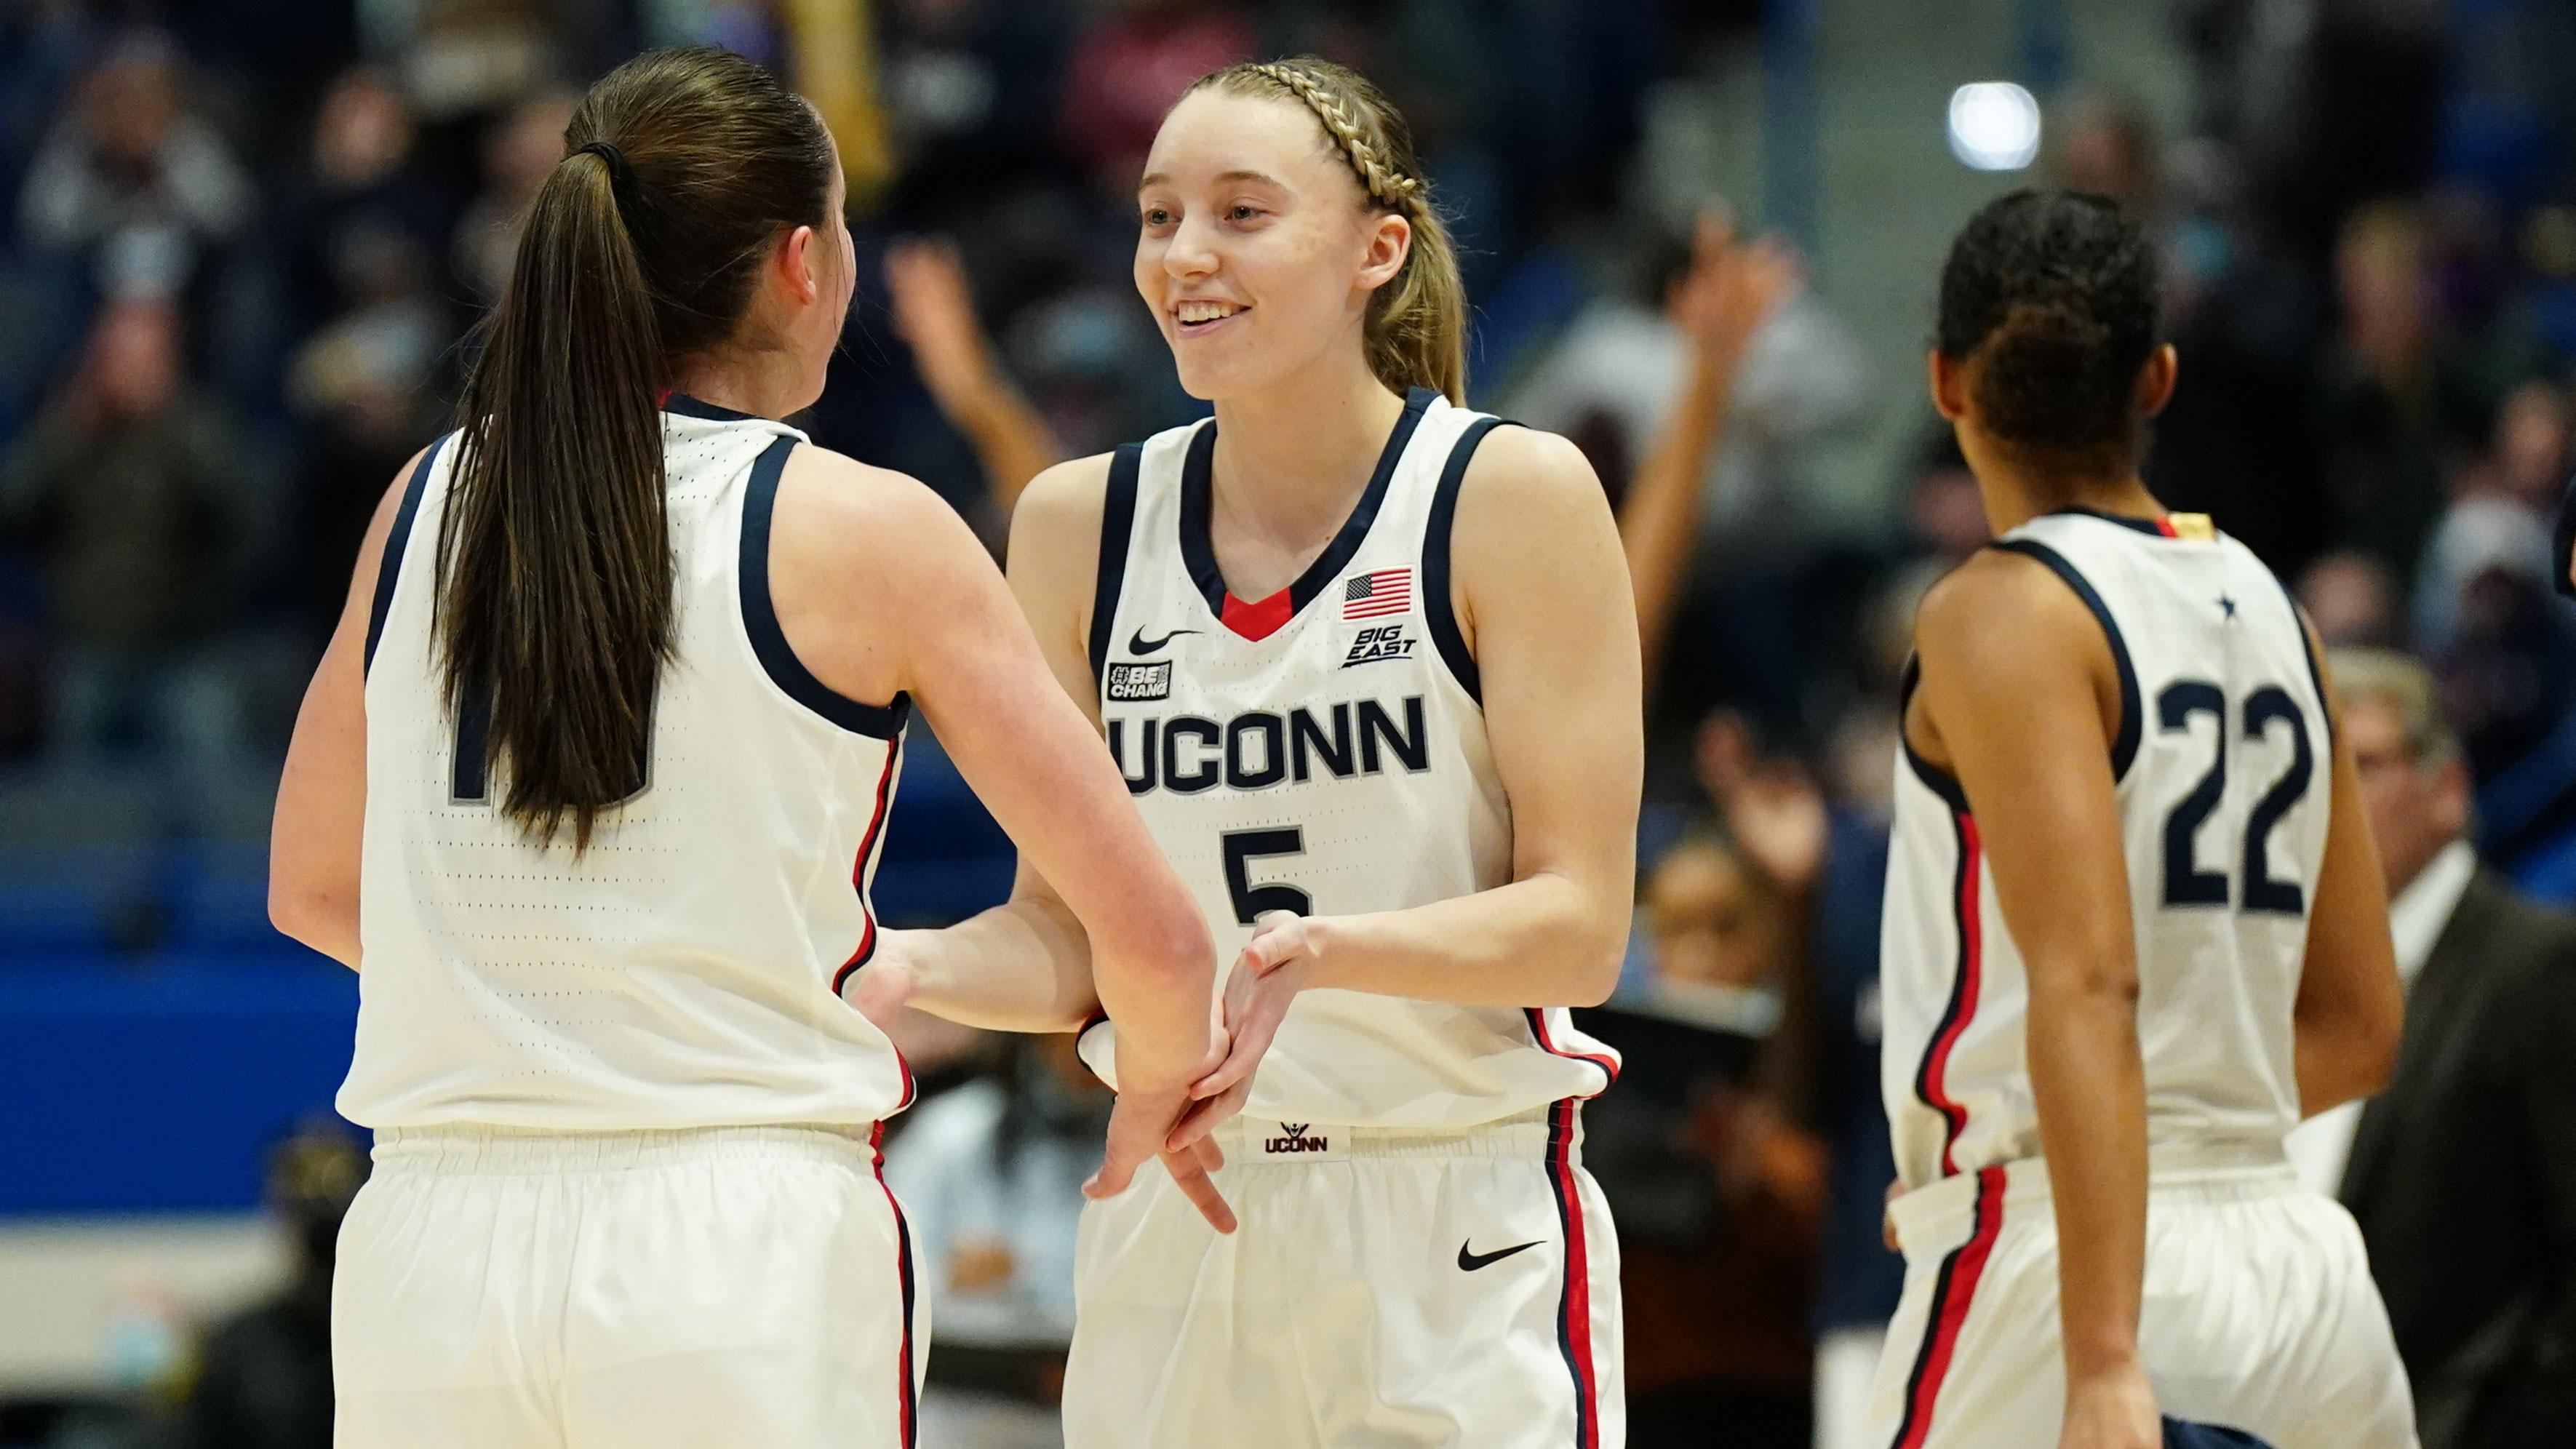 Feb 25, 2022; Hartford, Connecticut, USA; UConn Huskies guard Paige Bueckers (5) comes off the bench against the St. John's Red Storm in the first half at XL Center to play after her knee injury back in December 2021. / David Butler II-USA TODAY Sports